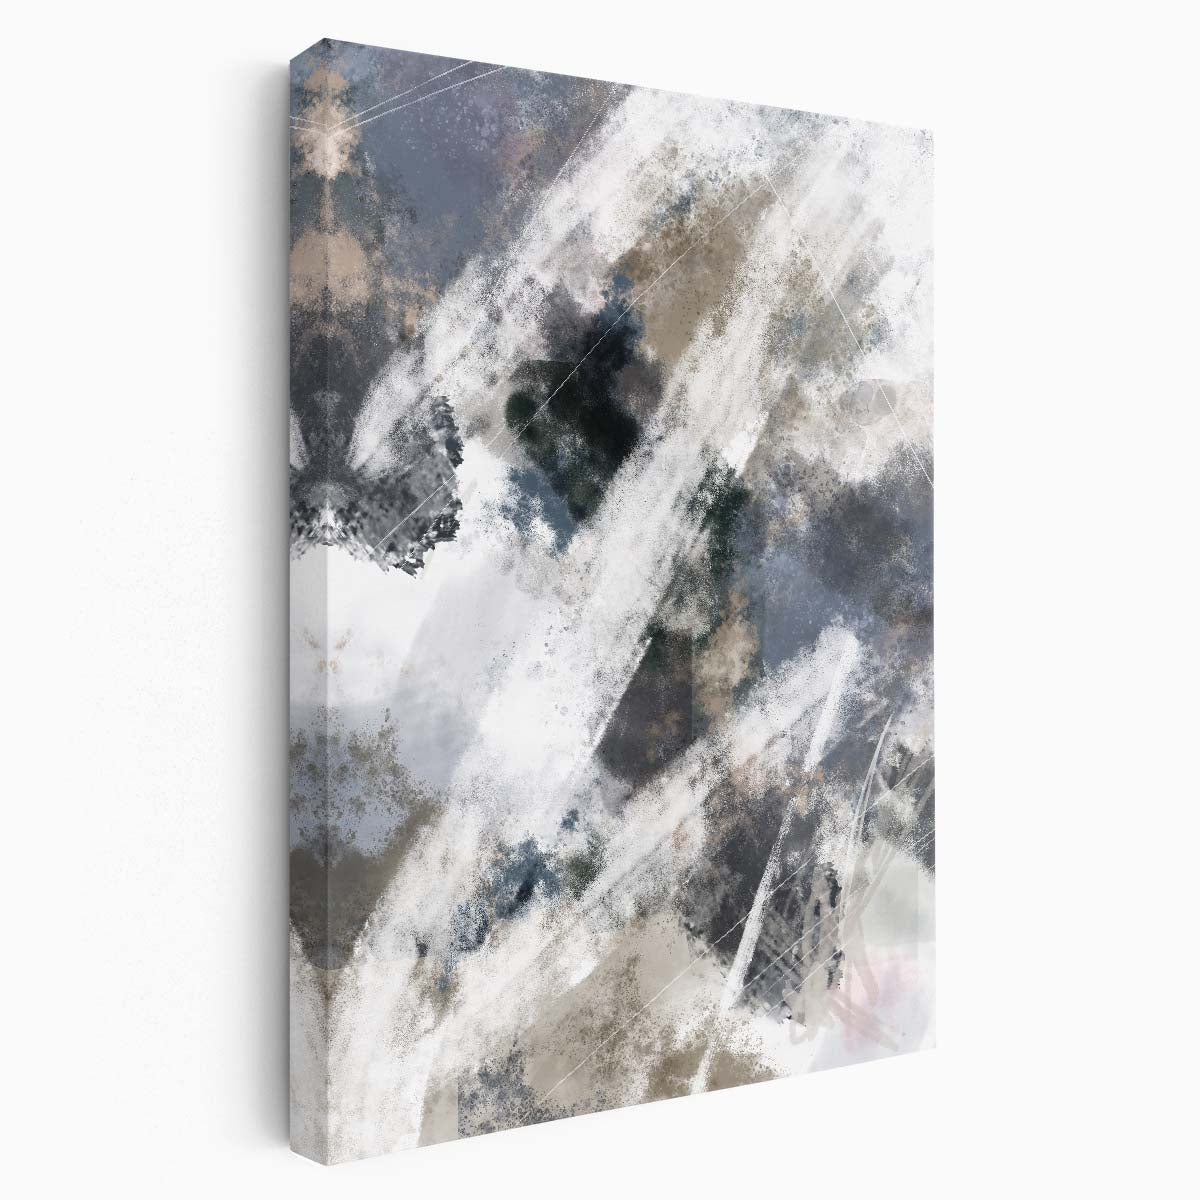 Abstract Geometric Zig Zag Illustration Painting with Painterly Texture by Luxuriance Designs, made in USA